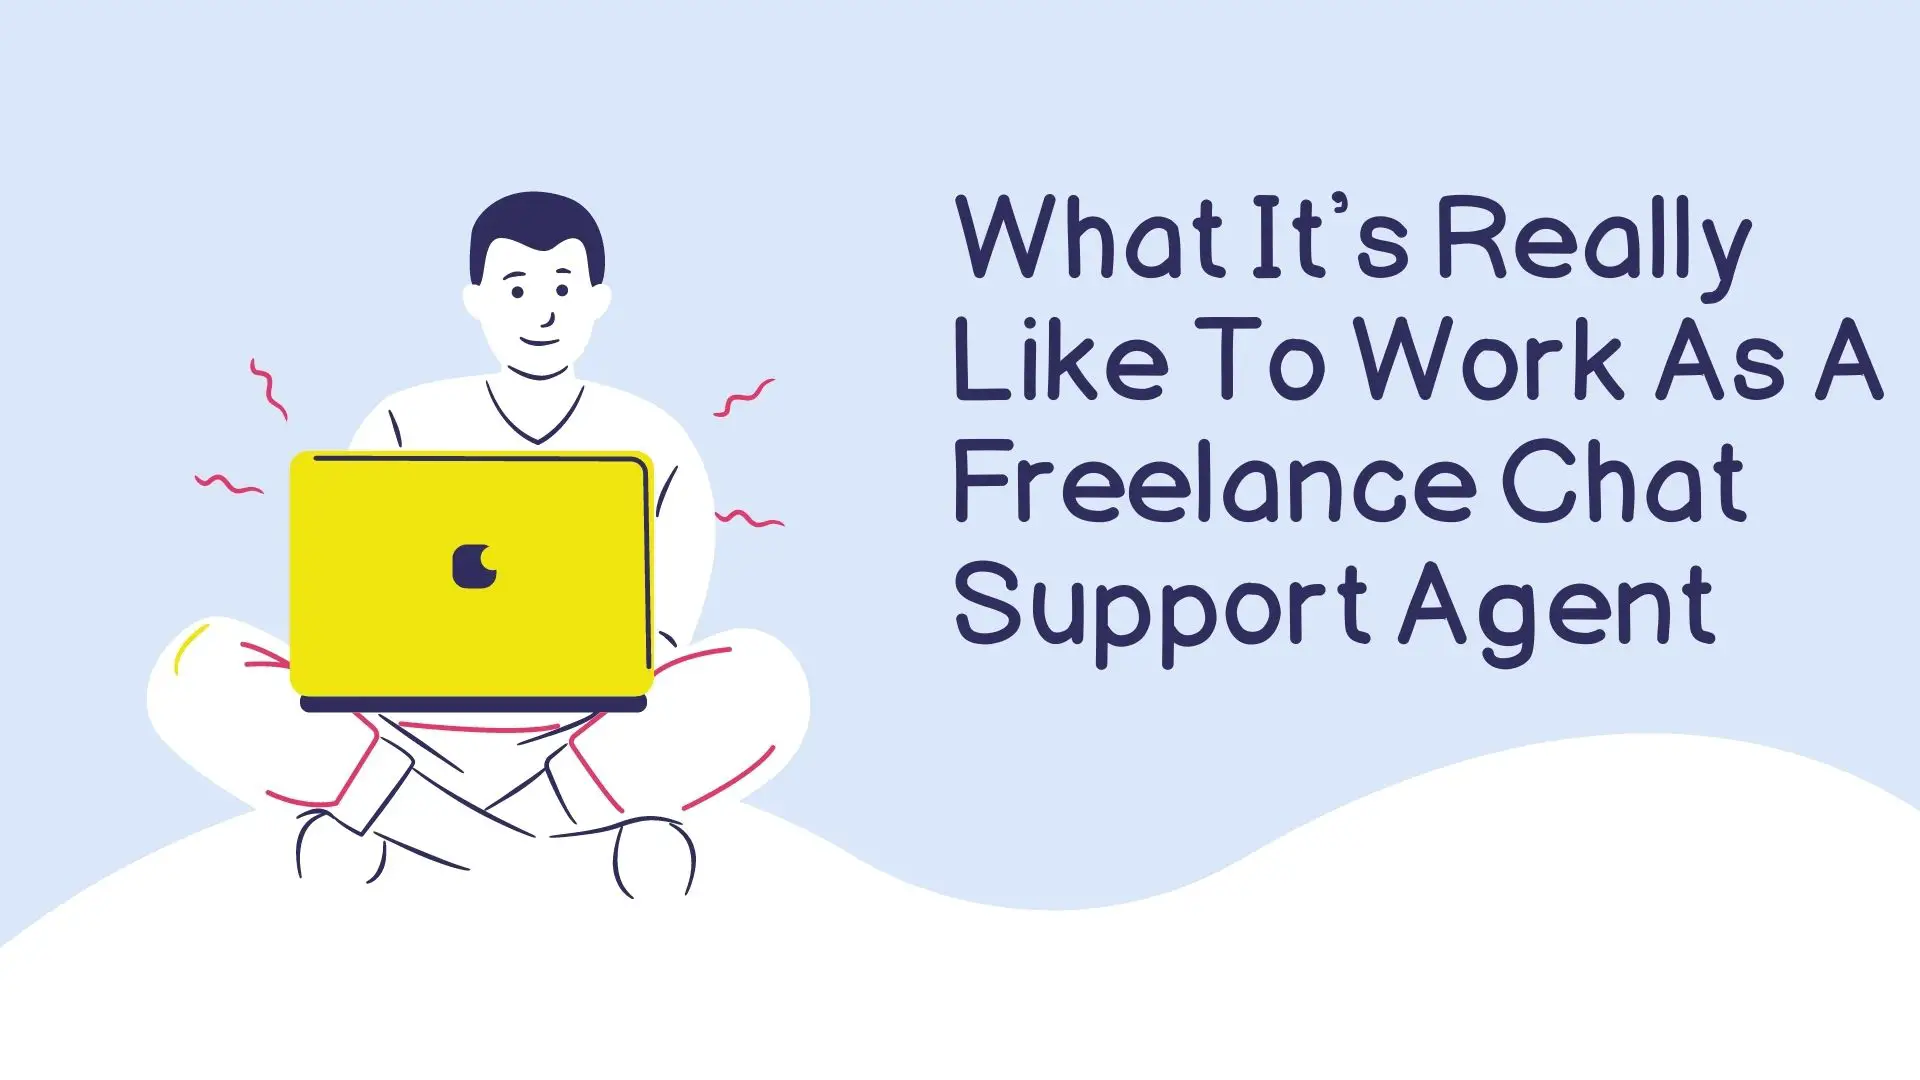 What It's Really Like To Work As A Freelance Chat Support Agent